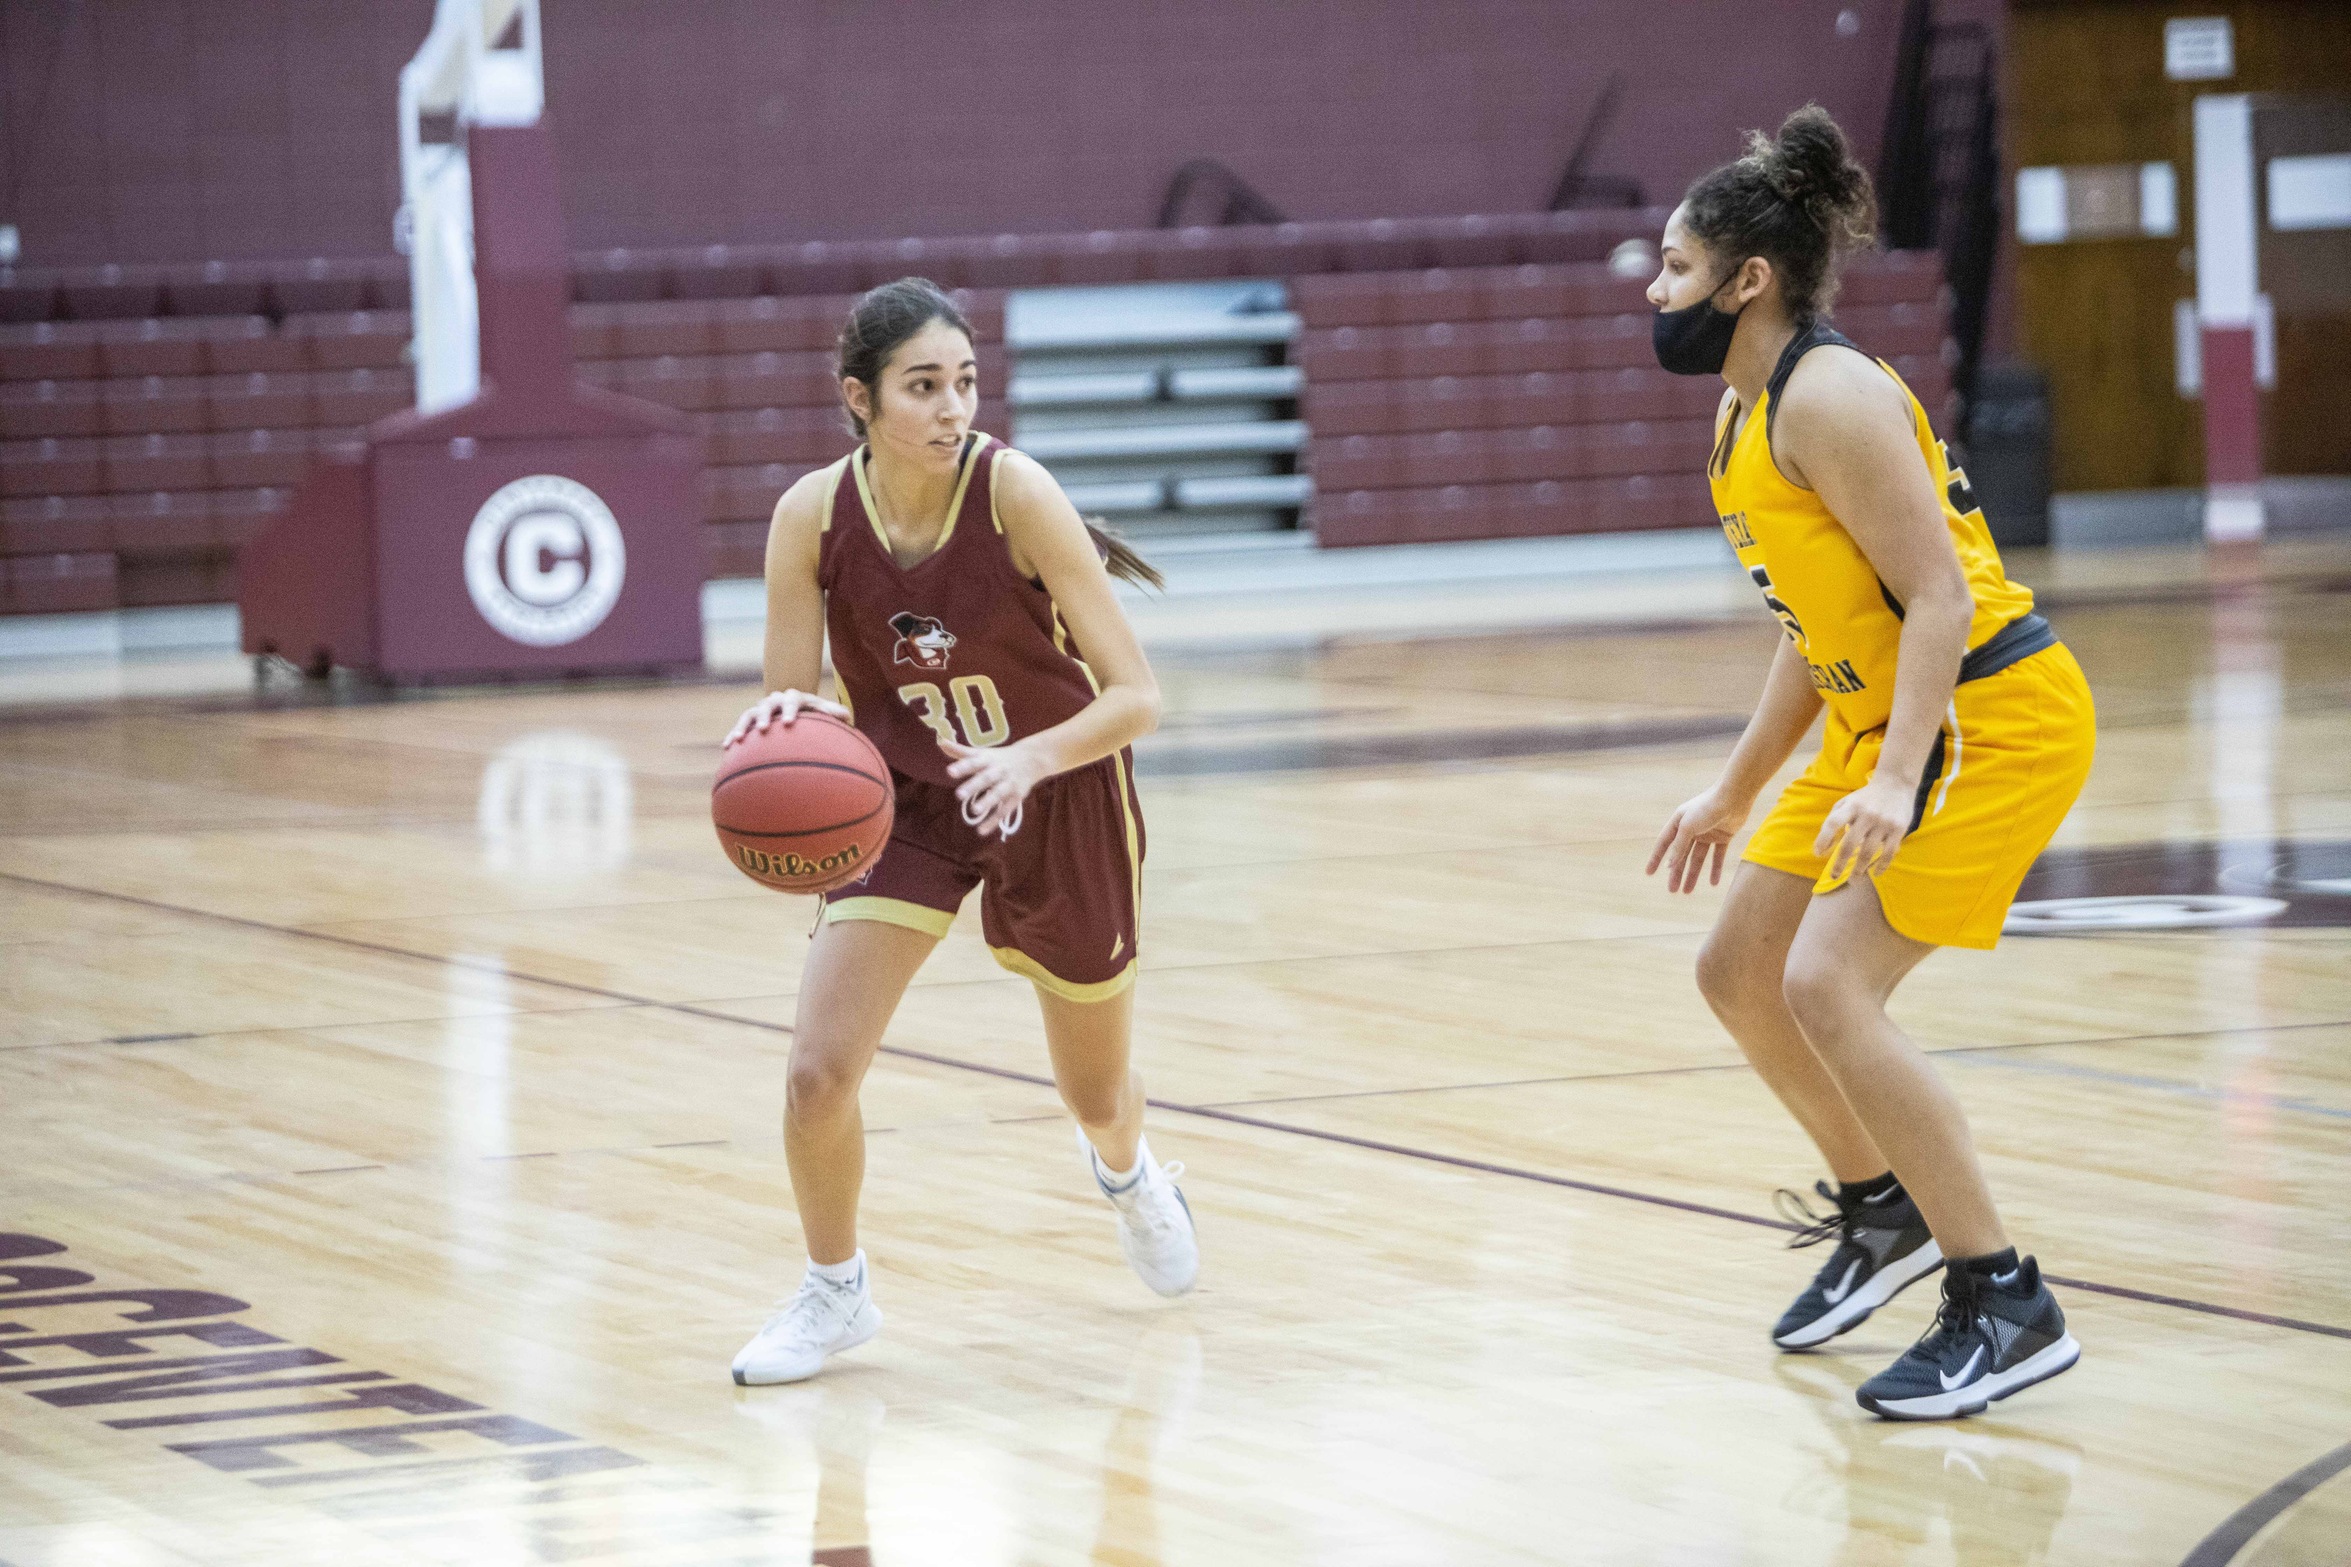 Women's Basketball Loses Heartbreaker, 57-55, to St. Thomas on Friday